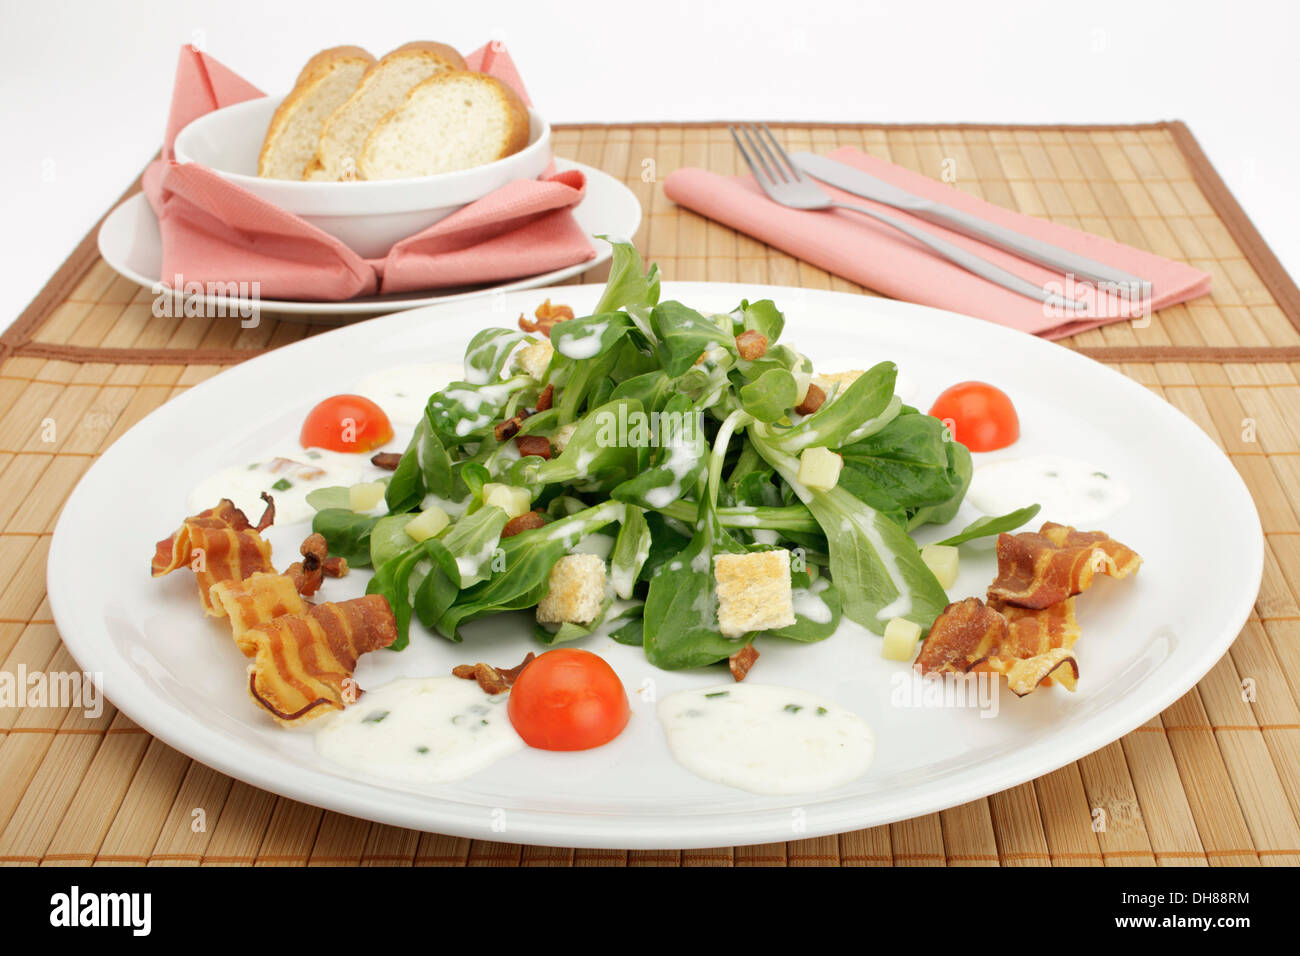 Field salad with potato dressing, bread croutons, fried bacon and French loaf Stock Photo